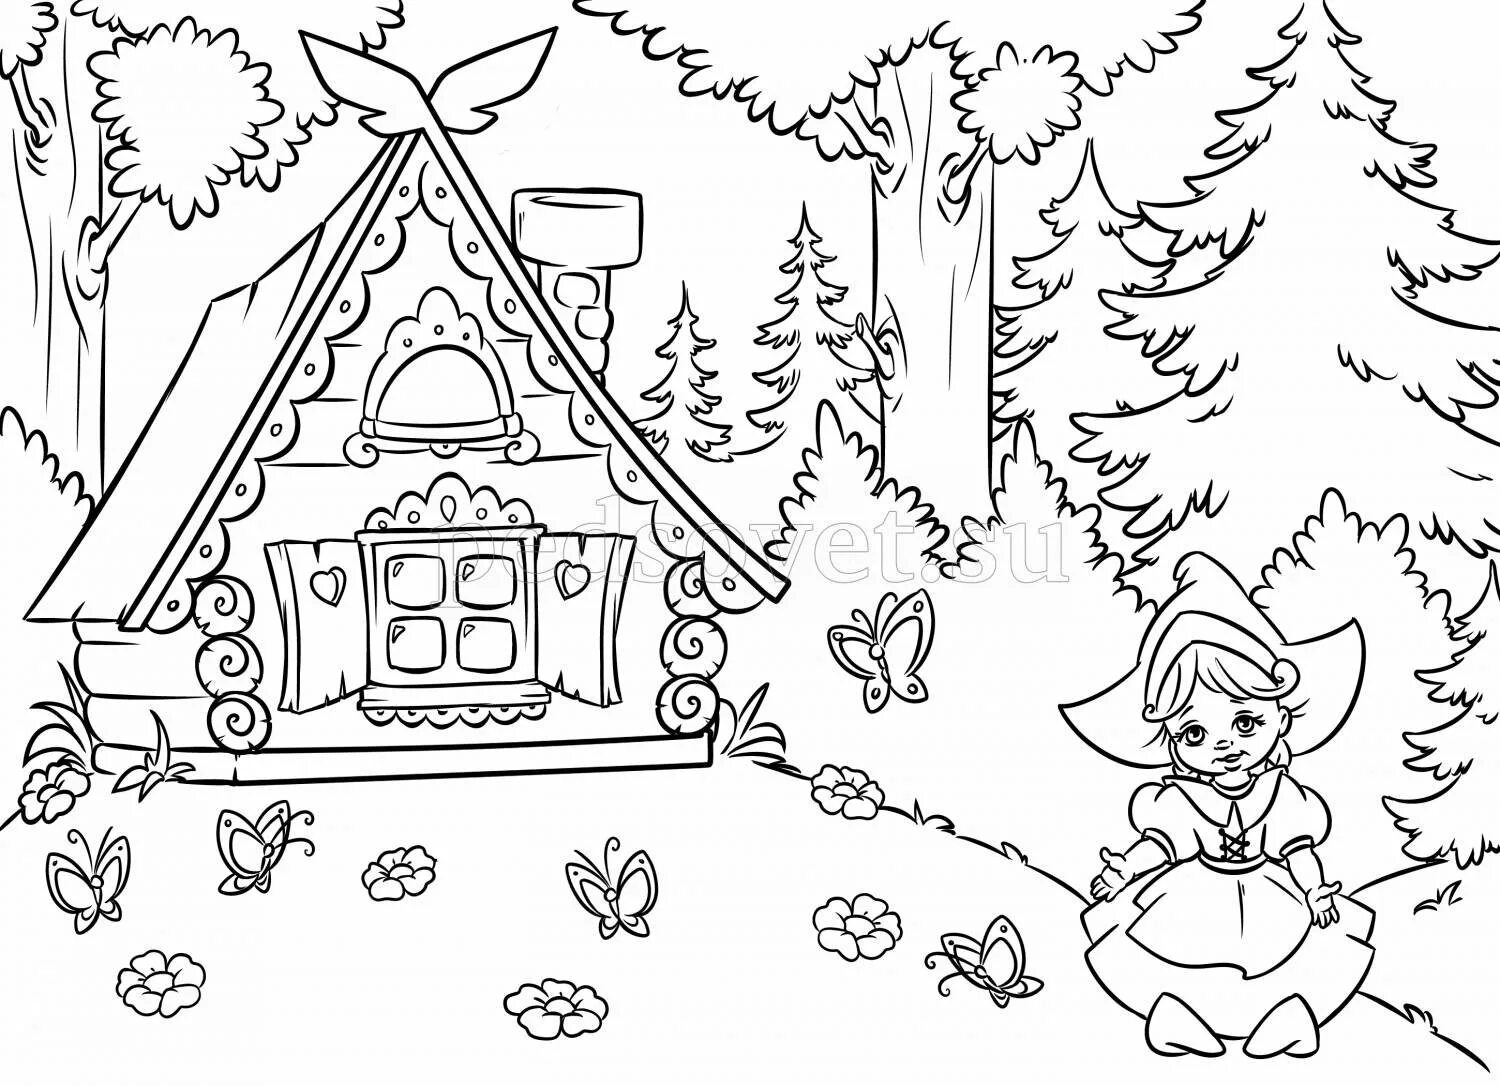 Little red riding hood coloring book